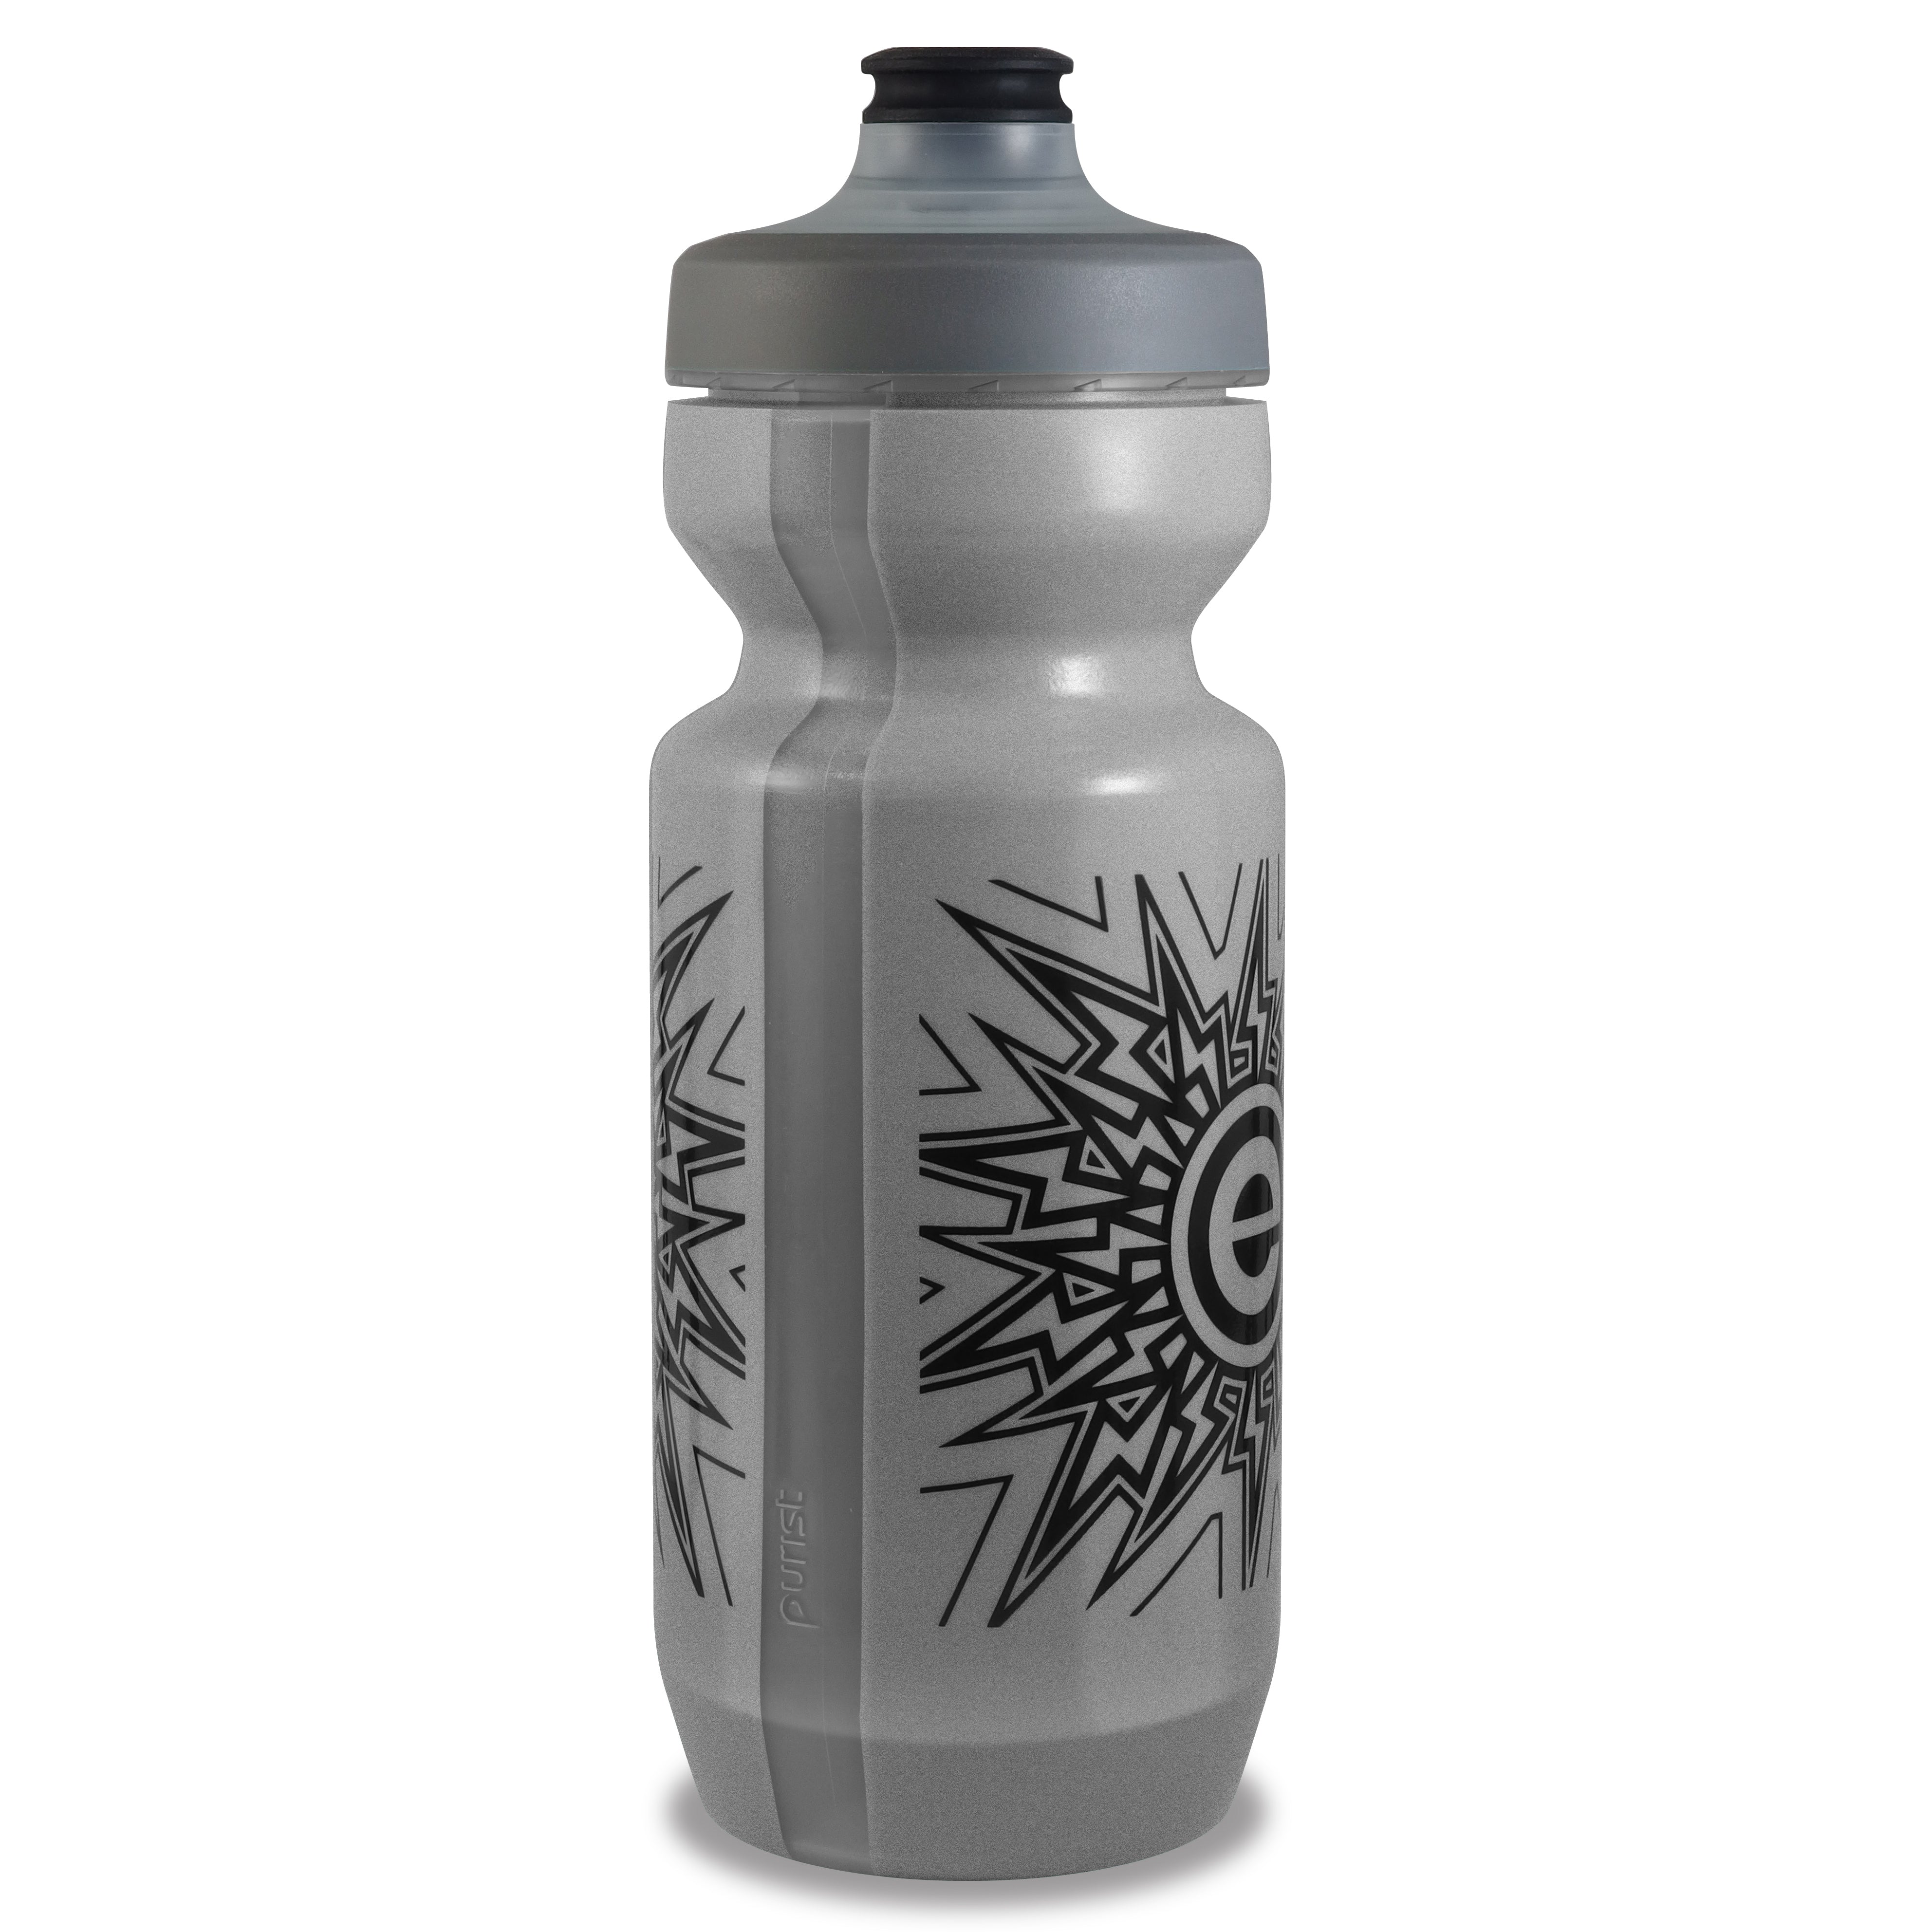 50 Strong Sports Squeeze Water Bottle 2 Pack - 22 oz. BPA Free Easy Open Push/Pull Cap - Fits in Most Bike Cages, Black